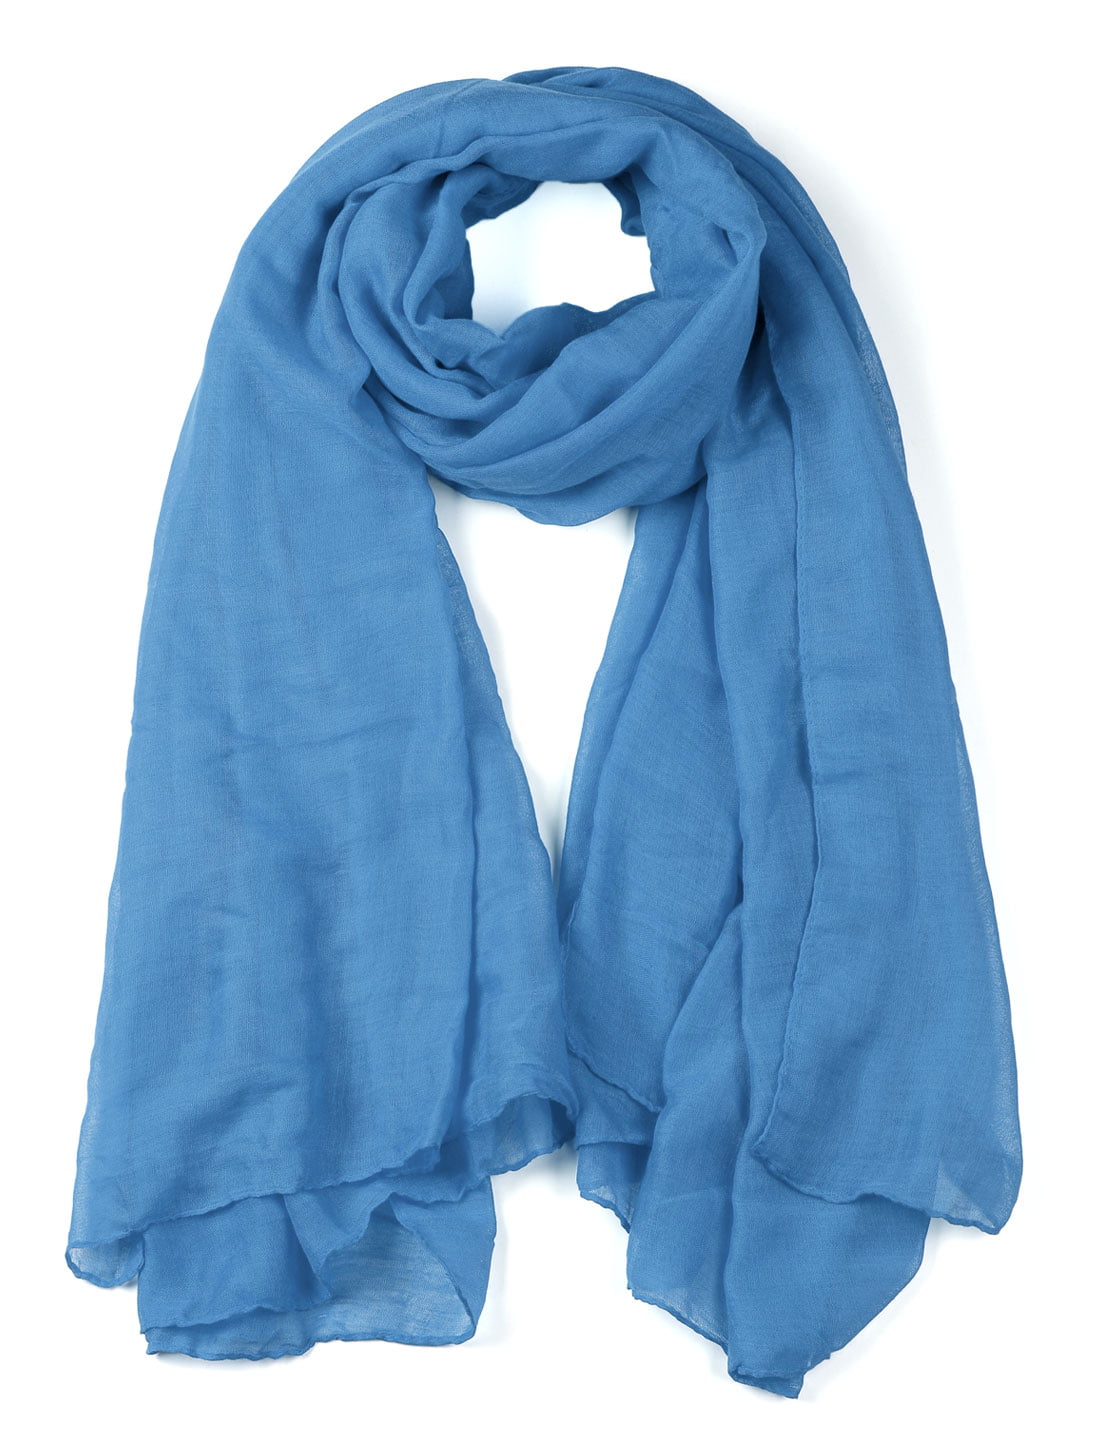 Soft Lightweight Long Scarves With Solid Color Shawl For Women Men ...